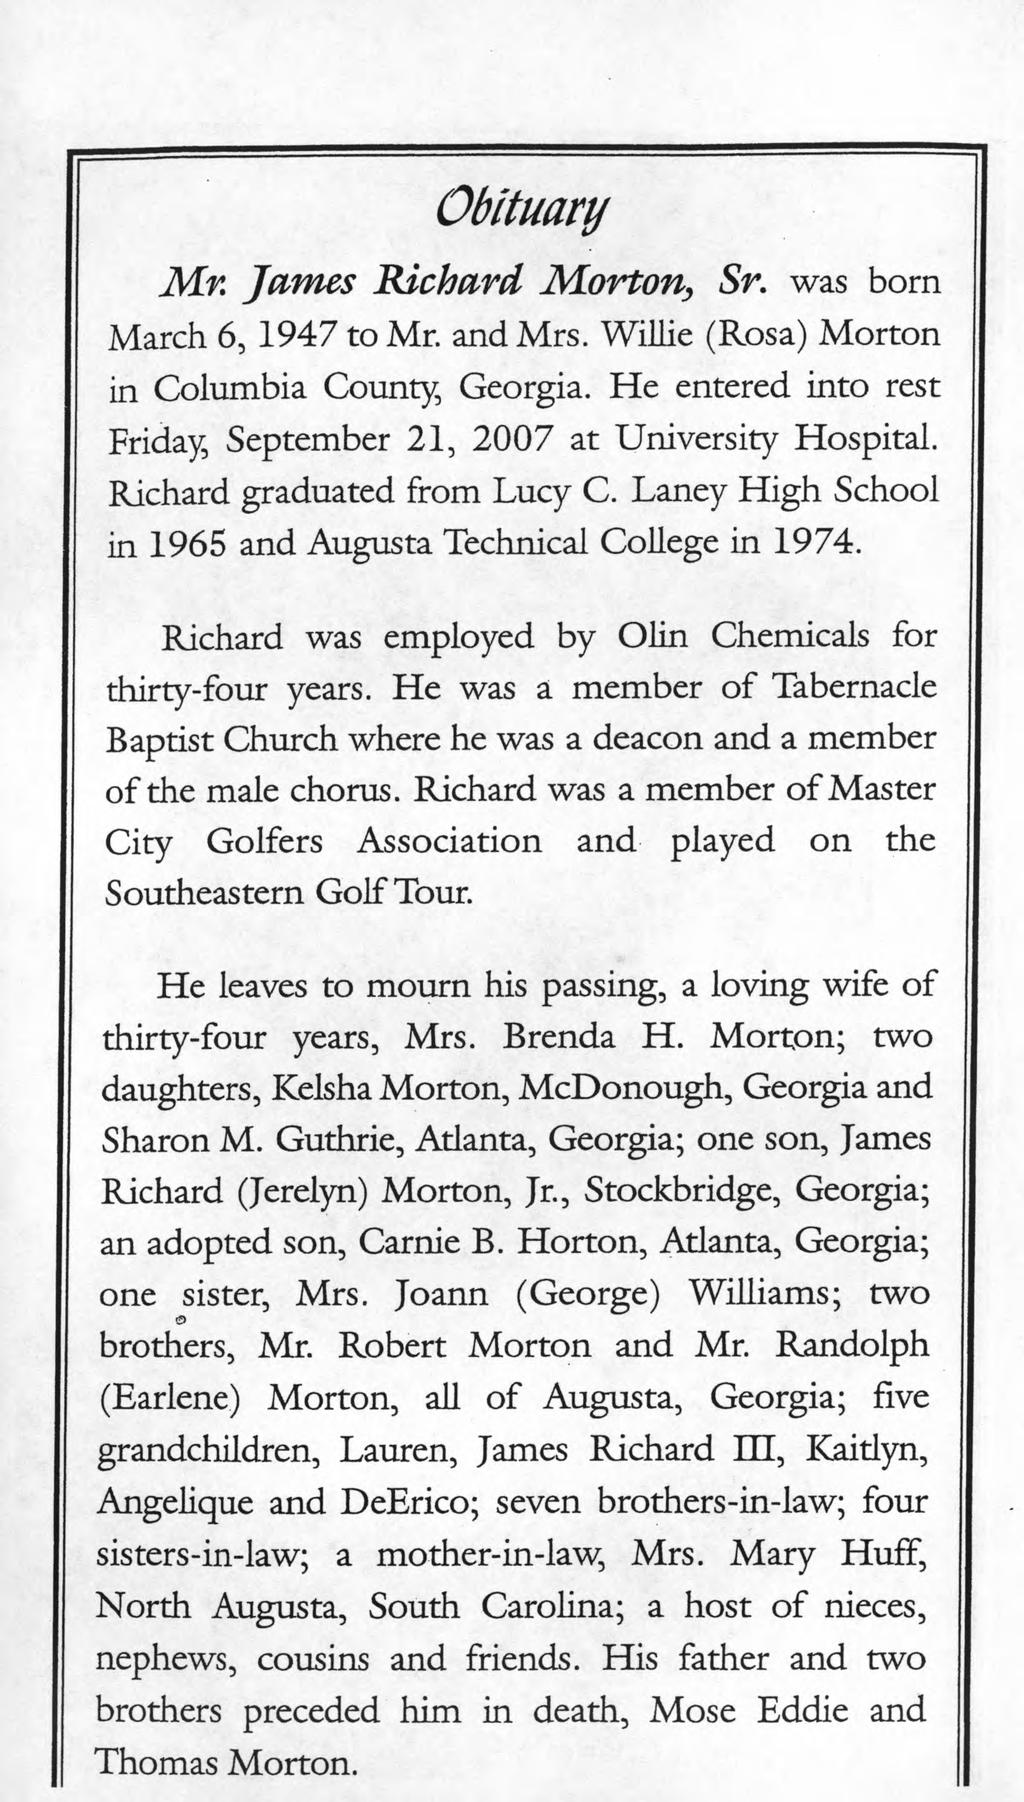 Obituary Mr. James Richard Morton, Sr. was born March 6, 1947 to Mr. and Mrs. WiJIie (Rosa) Morton in Columbia County, Georgia. He entered into rest Friday, September 21, 2007 at University Hospital.